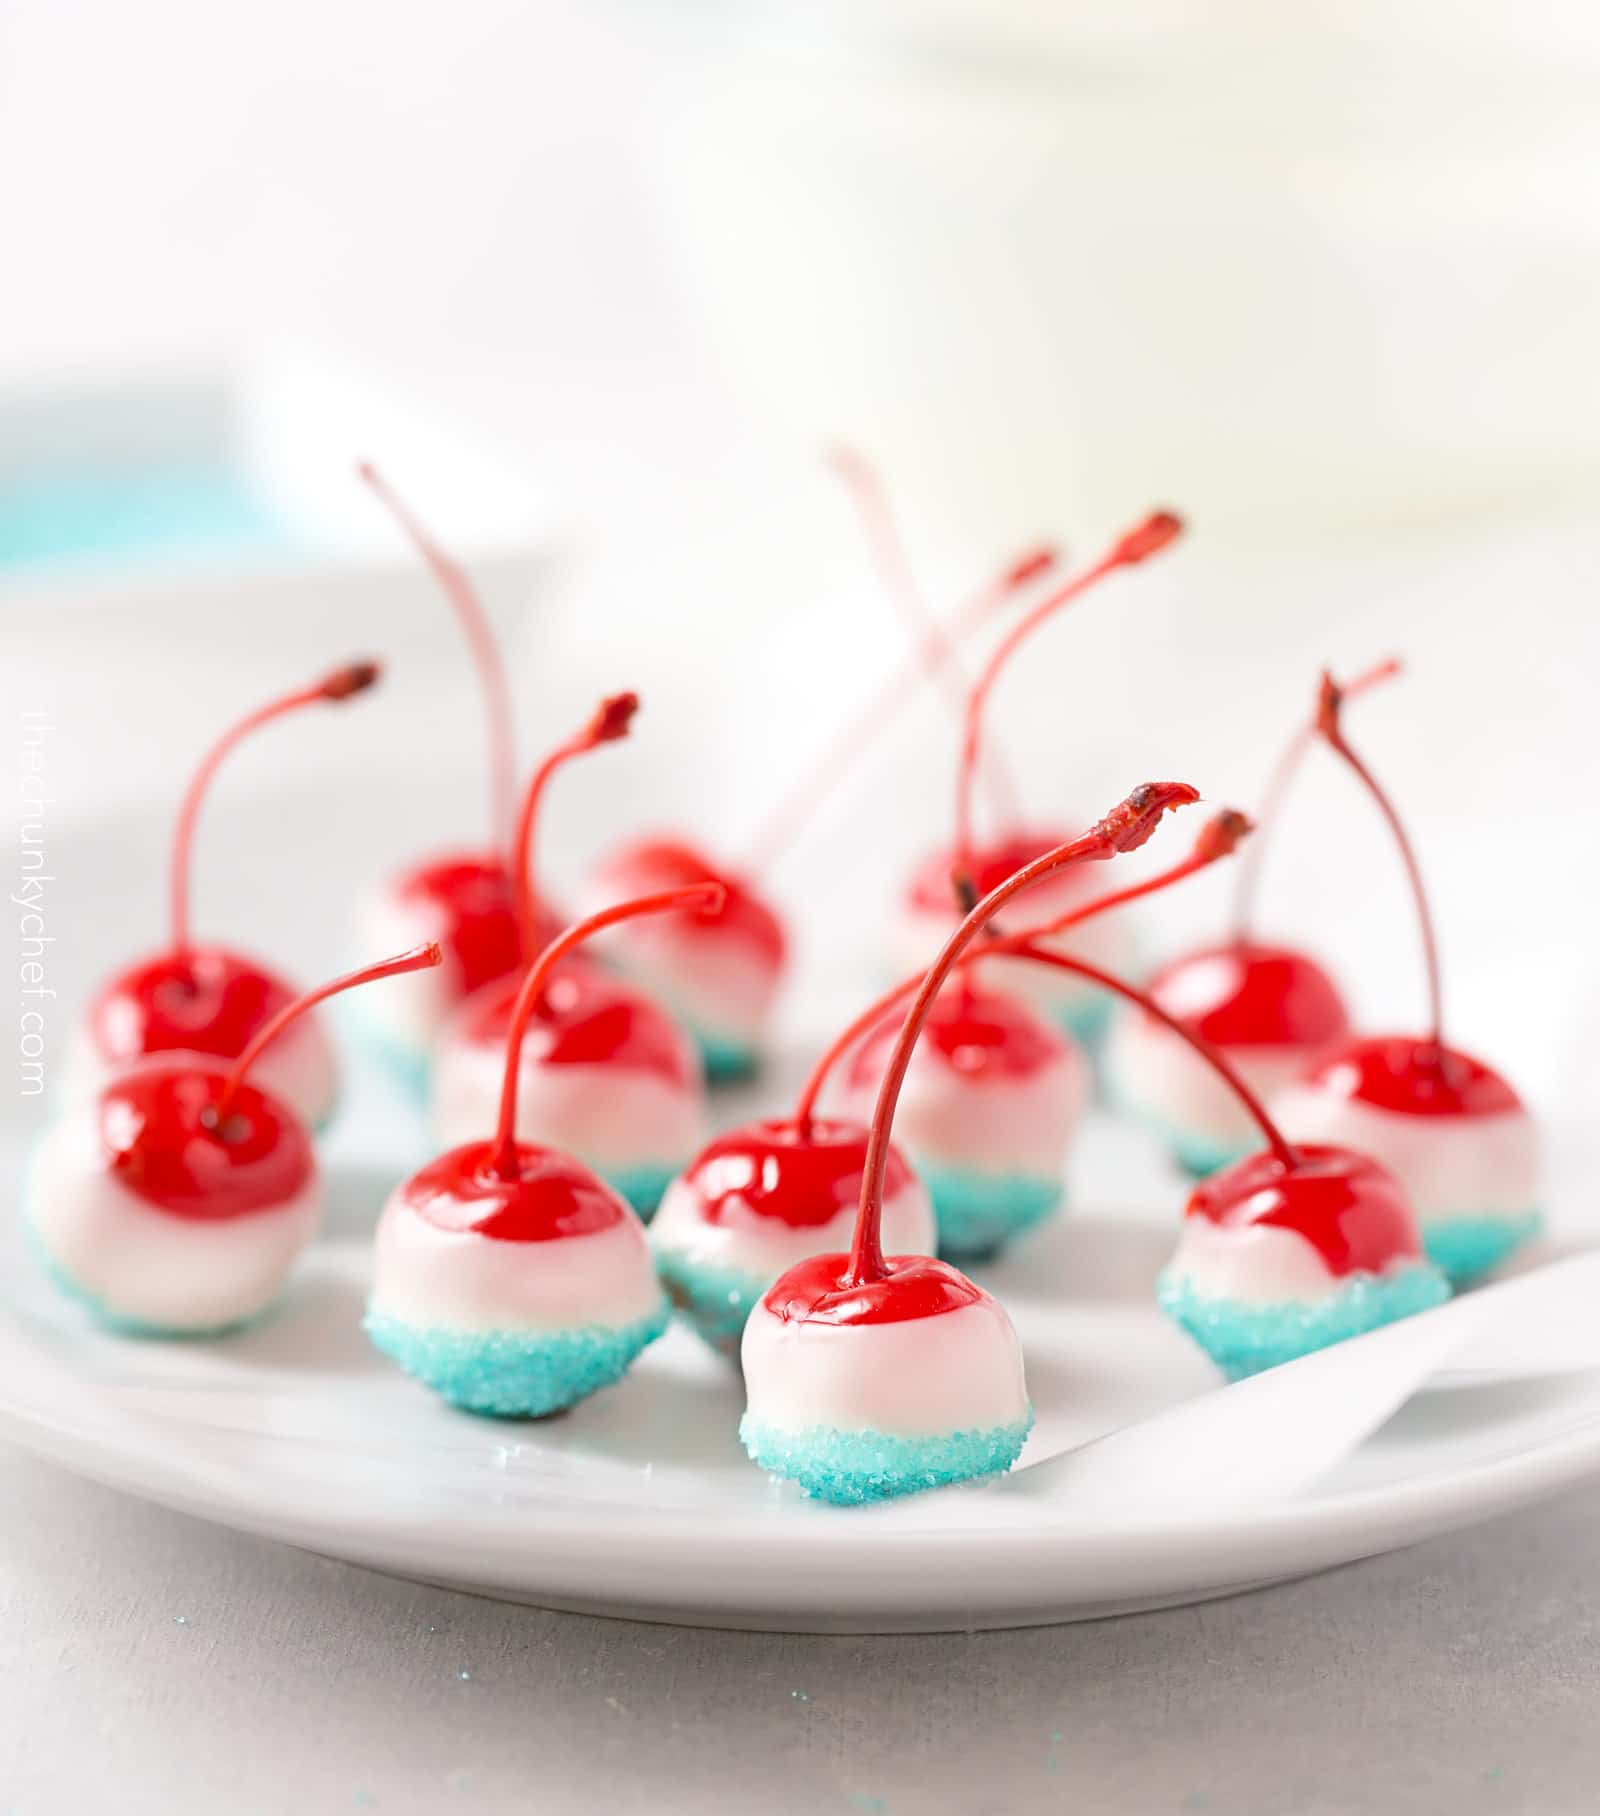 Cola Soaked Firecracker Cherries | Maraschino cherries are soaked in sweet cola, dipped in white chocolate and kissed with blue sugar for a kid-friendly patriotic dessert! | http://thechunkychef.com